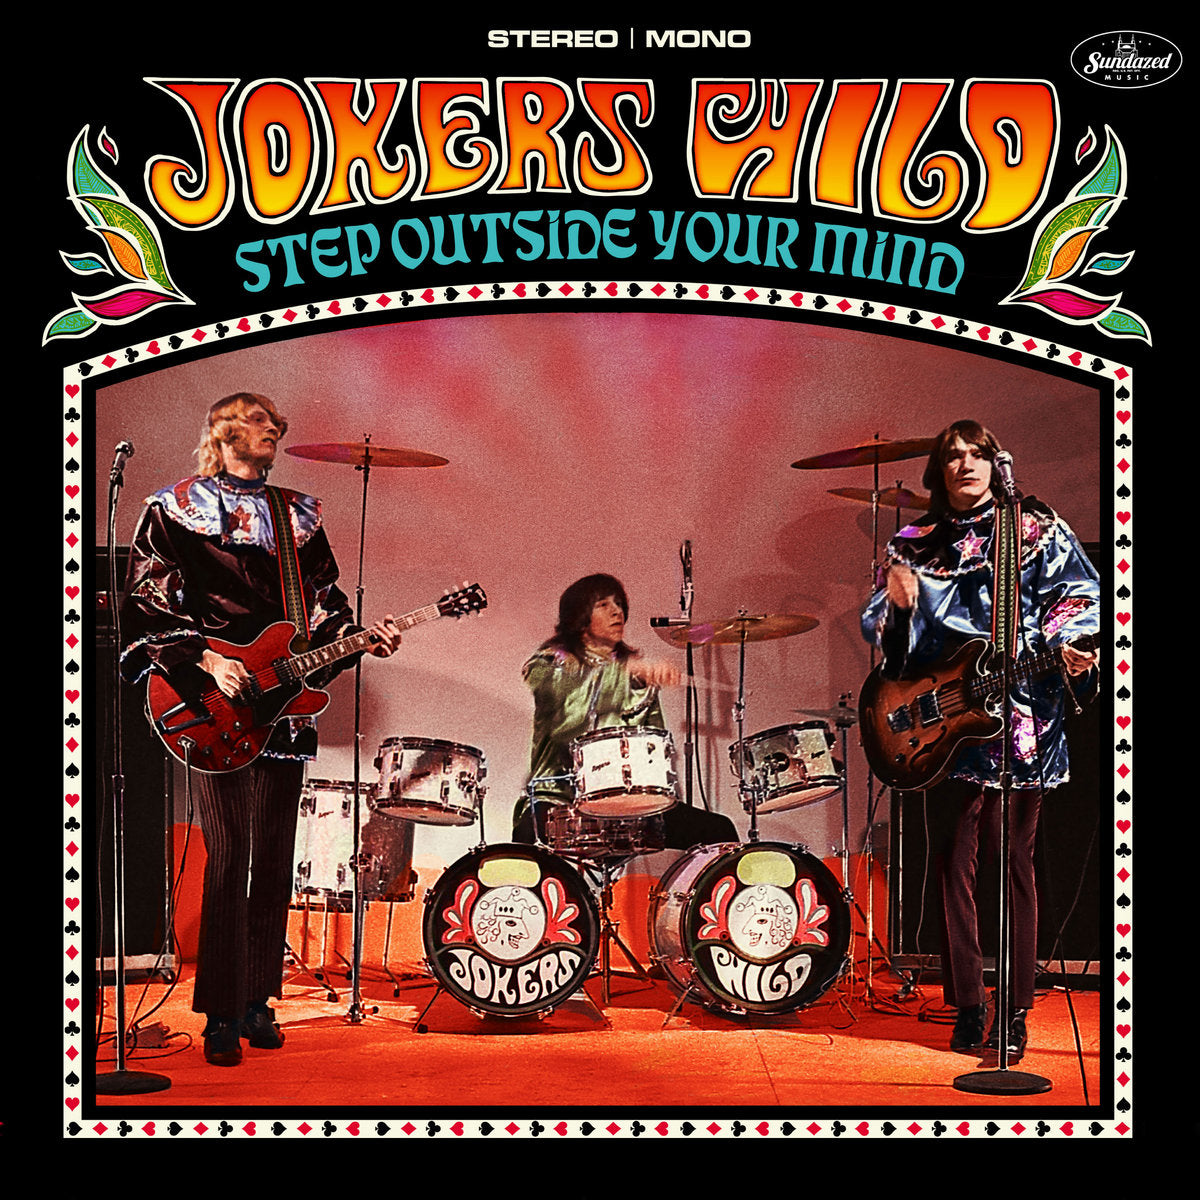 Jokers Wild "Step Outside Your Mind" 2LP